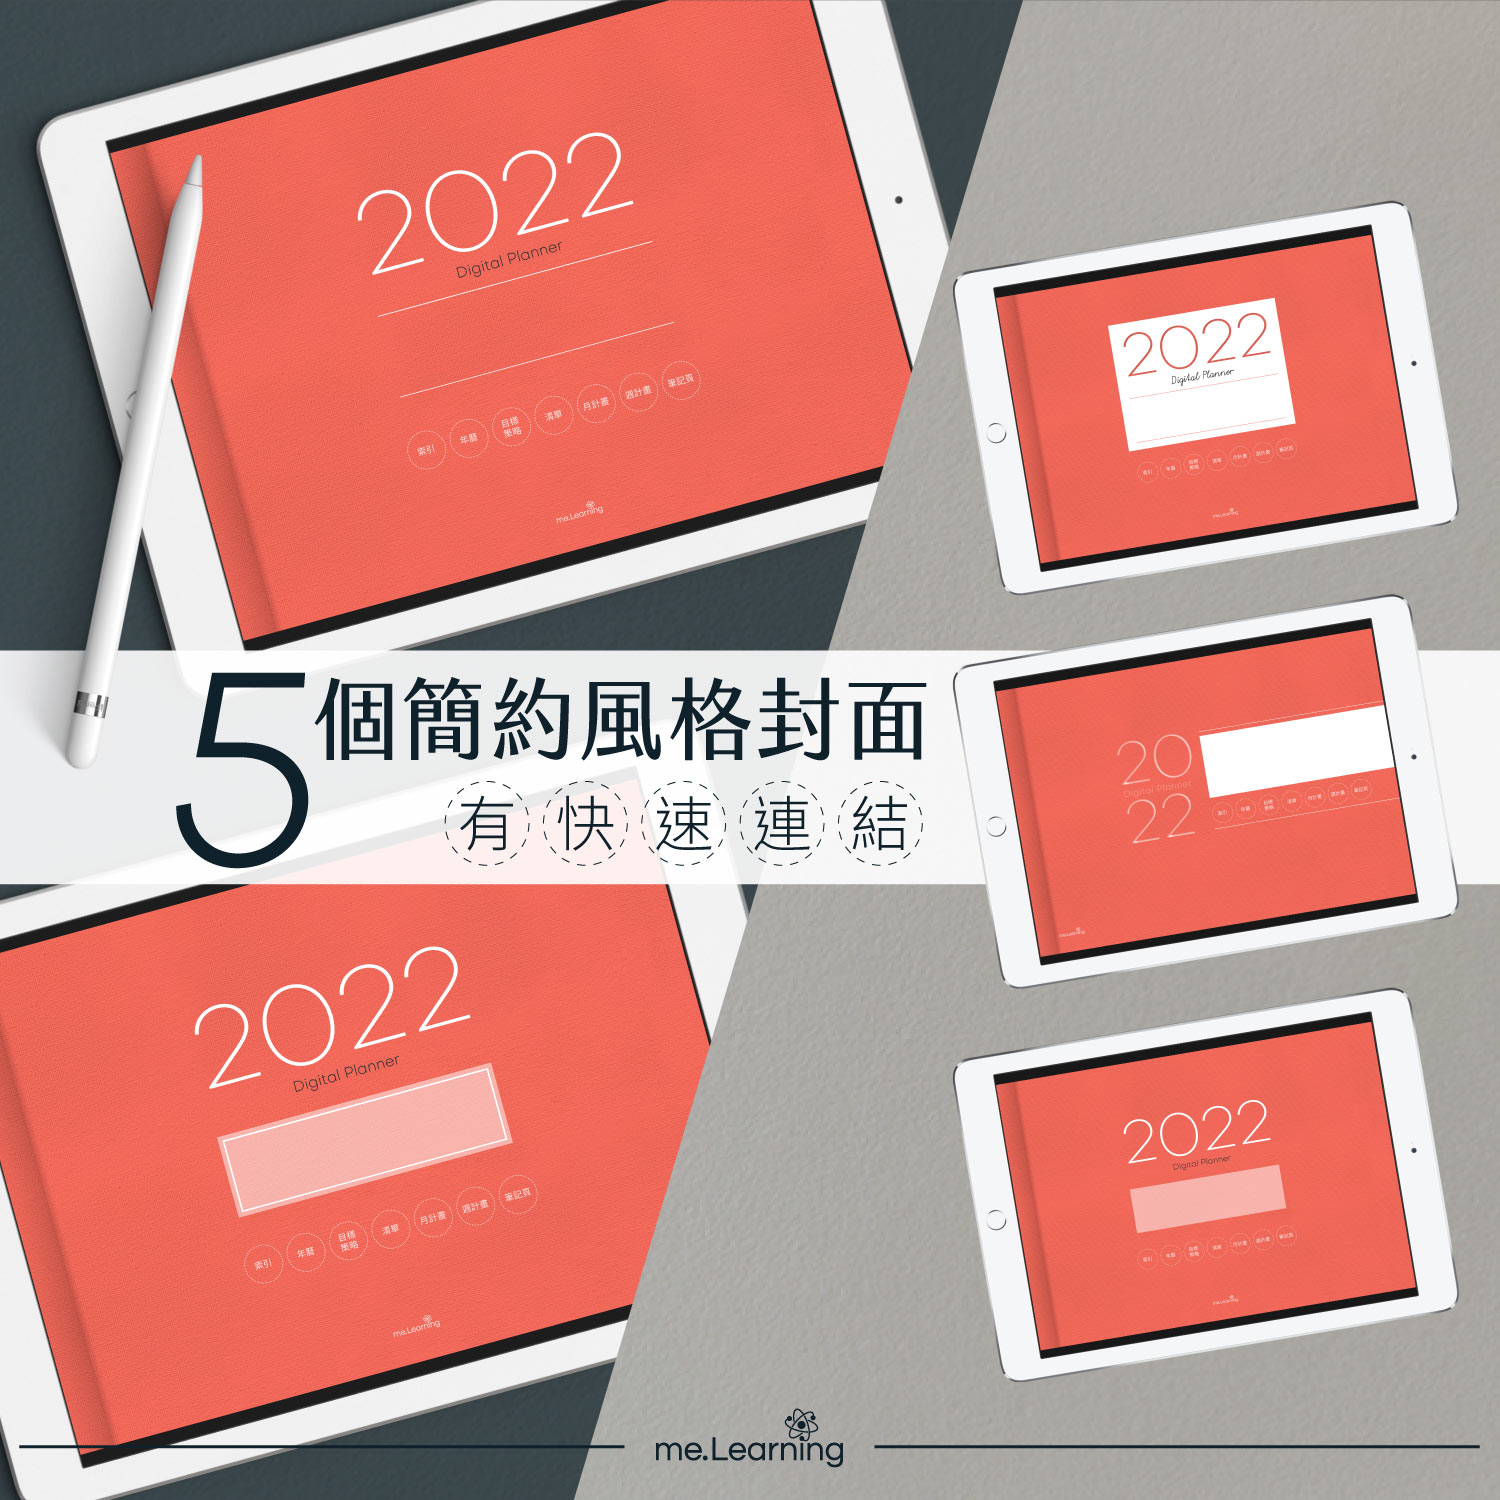 iPad digital planner 2022-Yearly-Coral Red 封面手寫說明 | me.Learning